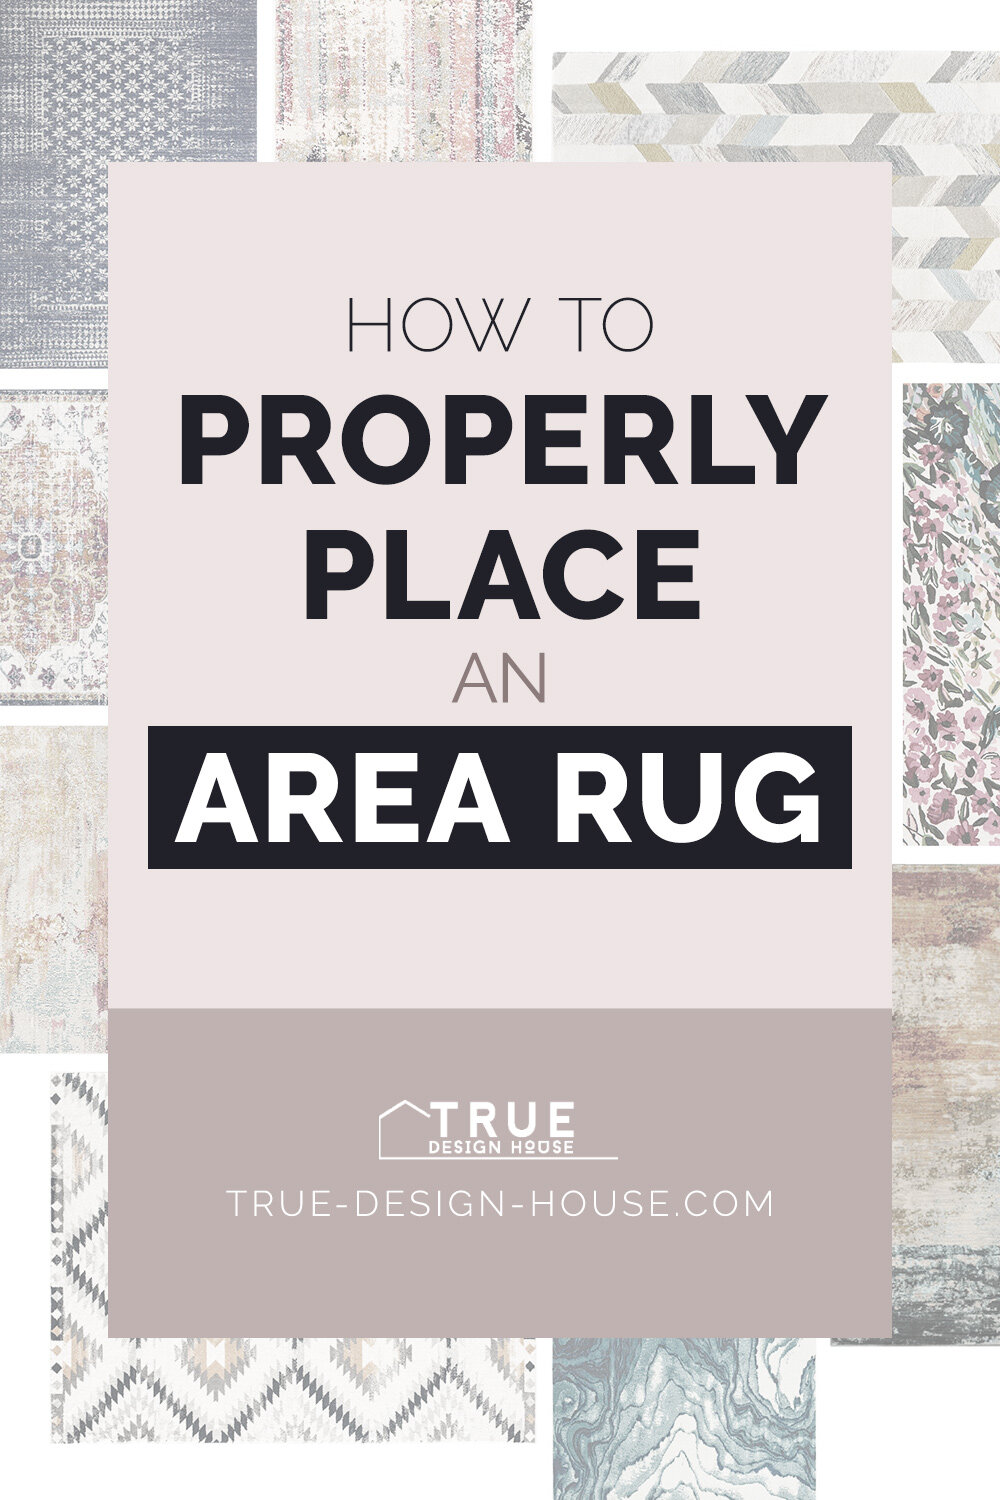 How To Properly Place An Area Rug